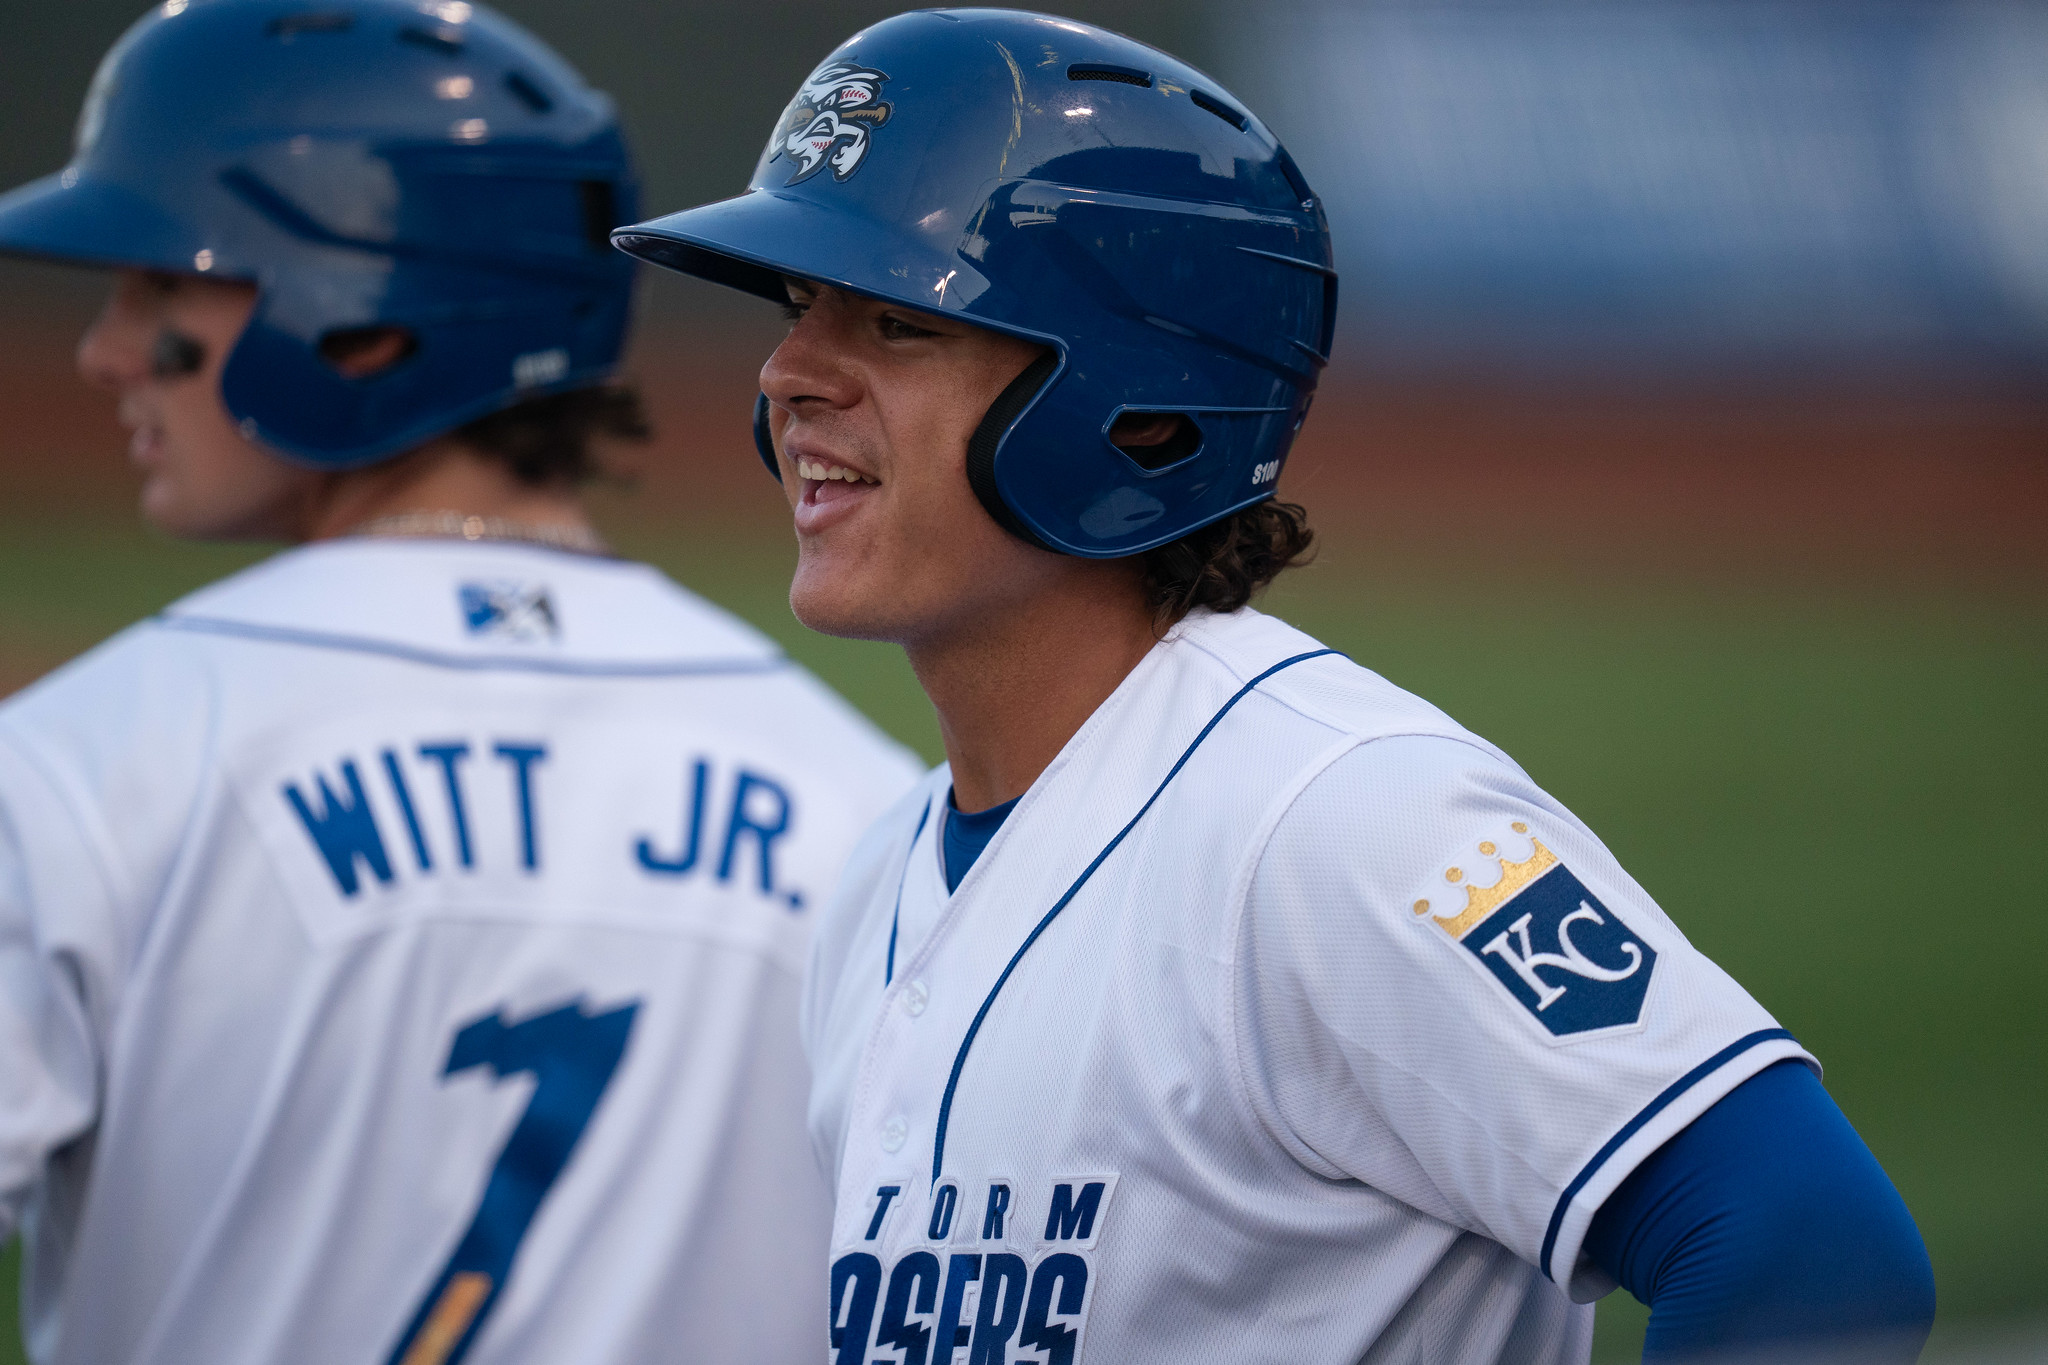 A smiling baseball player (Nick Pratto) is in the foreground in a white jersey top and a blue batting helmet. Teammate Bobby Witt, Jr. is in the background with his back turned and his last name visible on his jersey.